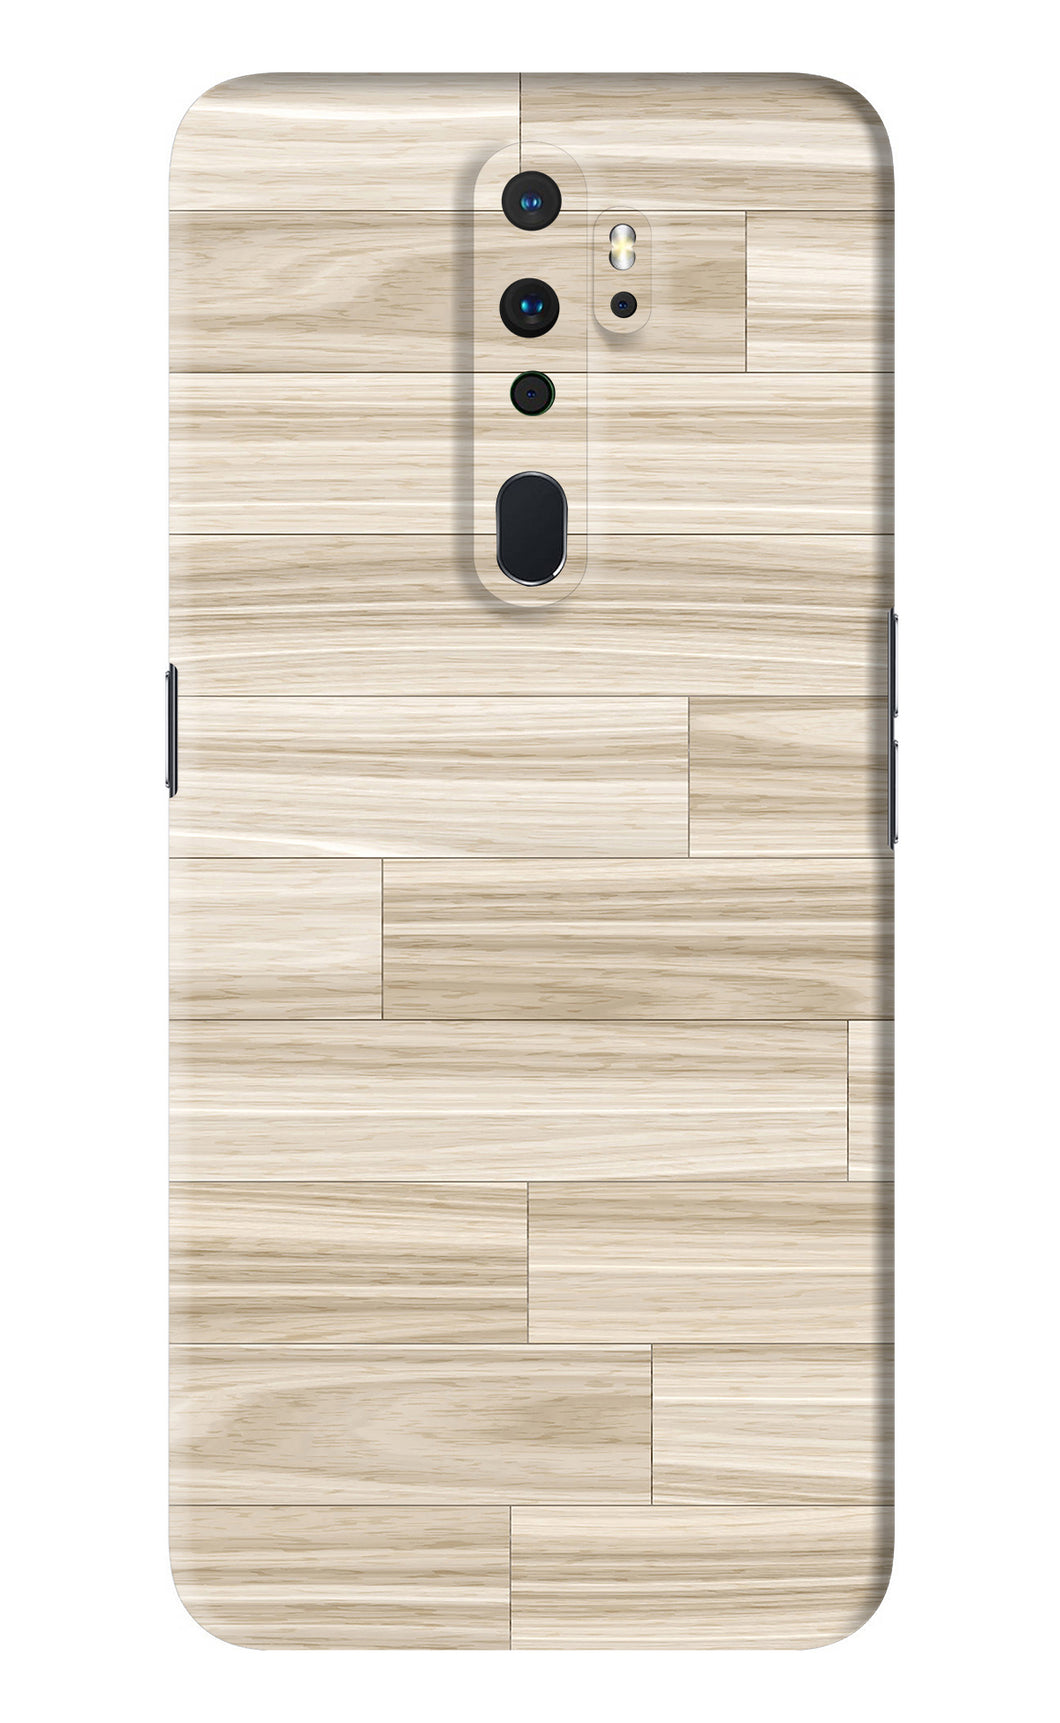 Wooden Art Texture Oppo A9 2020 Back Skin Wrap